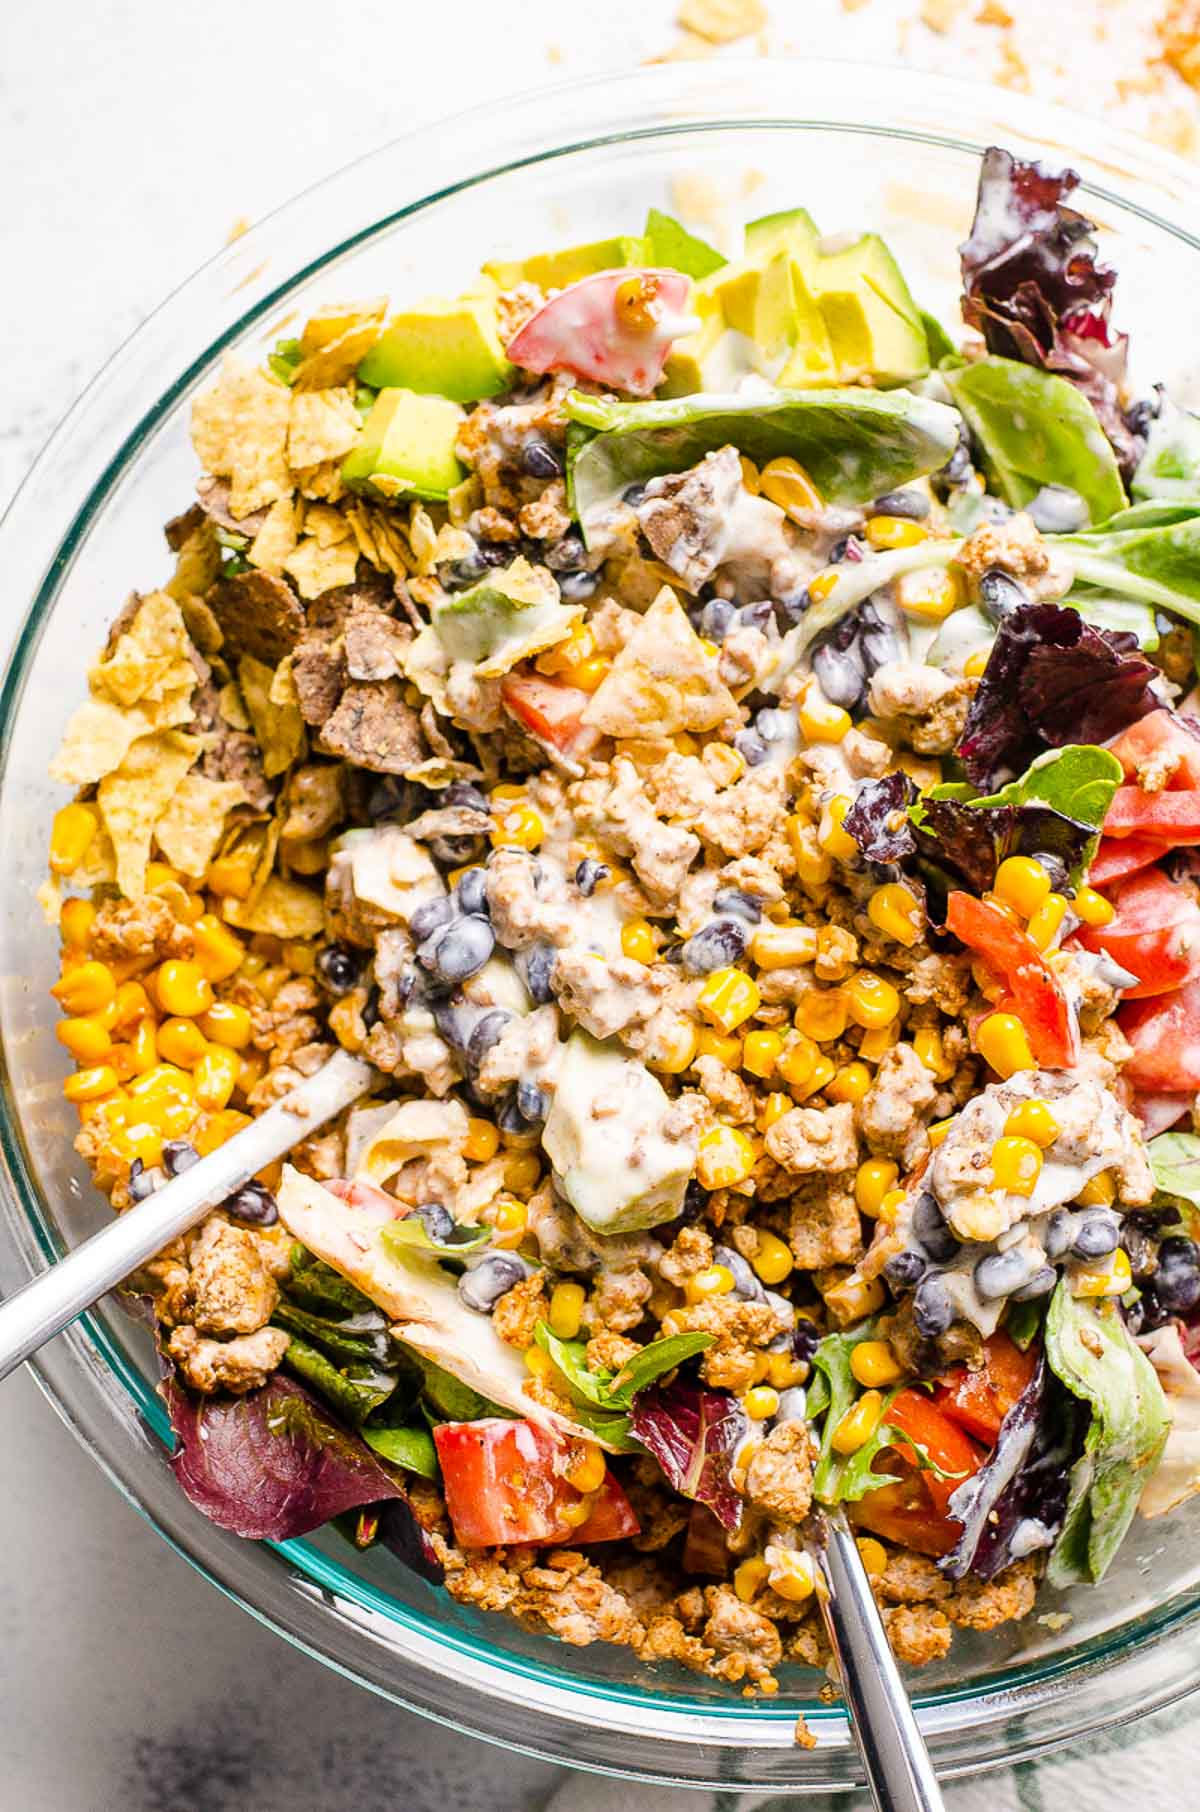 Healthy taco salad with ground turkey, lettuce, black beans and vegetables.